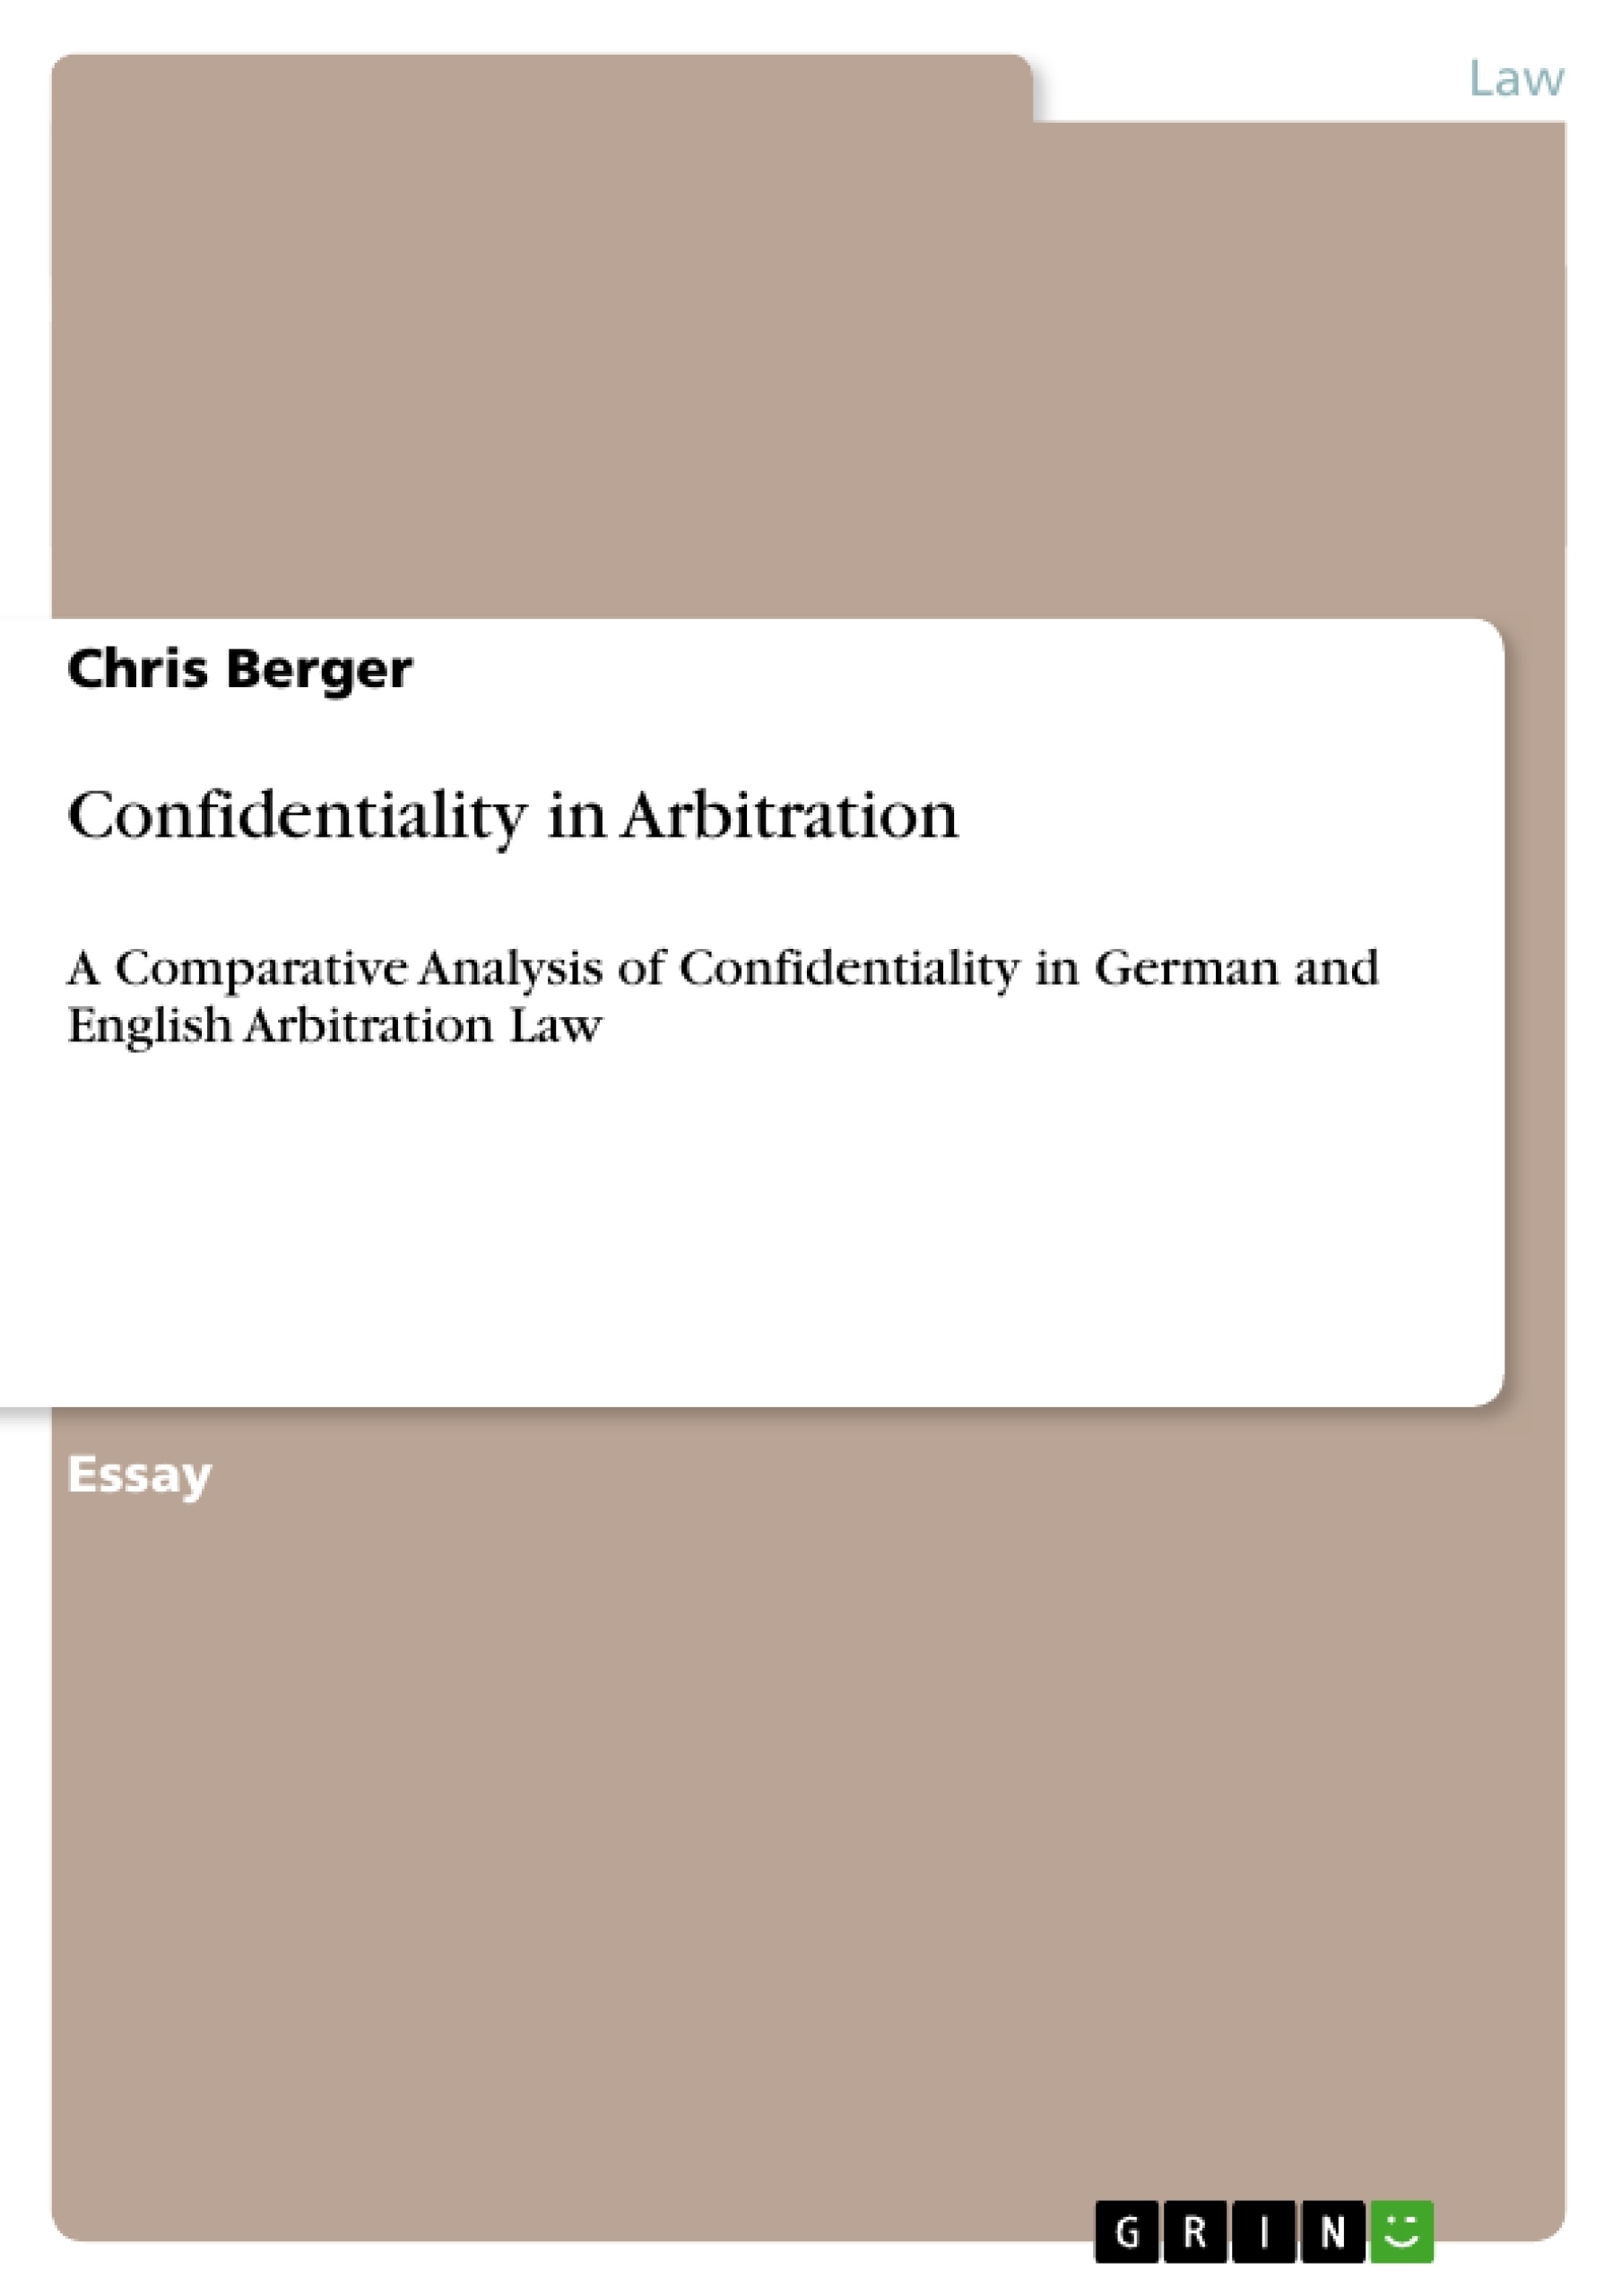 Title: Confidentiality in Arbitration